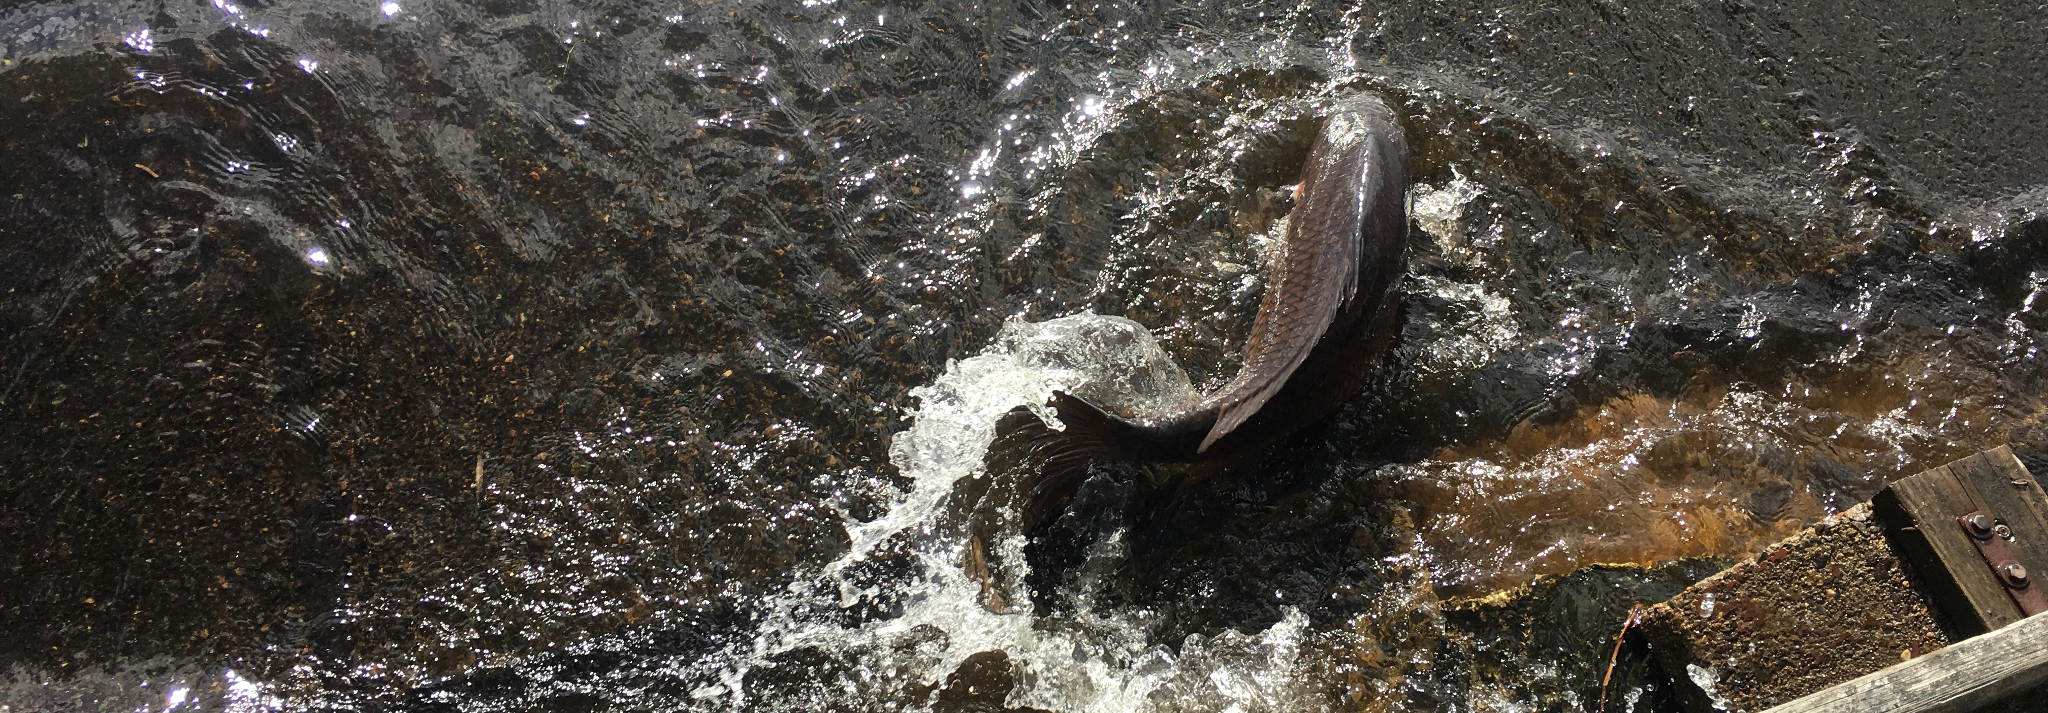 Carp trying to swim up a weir